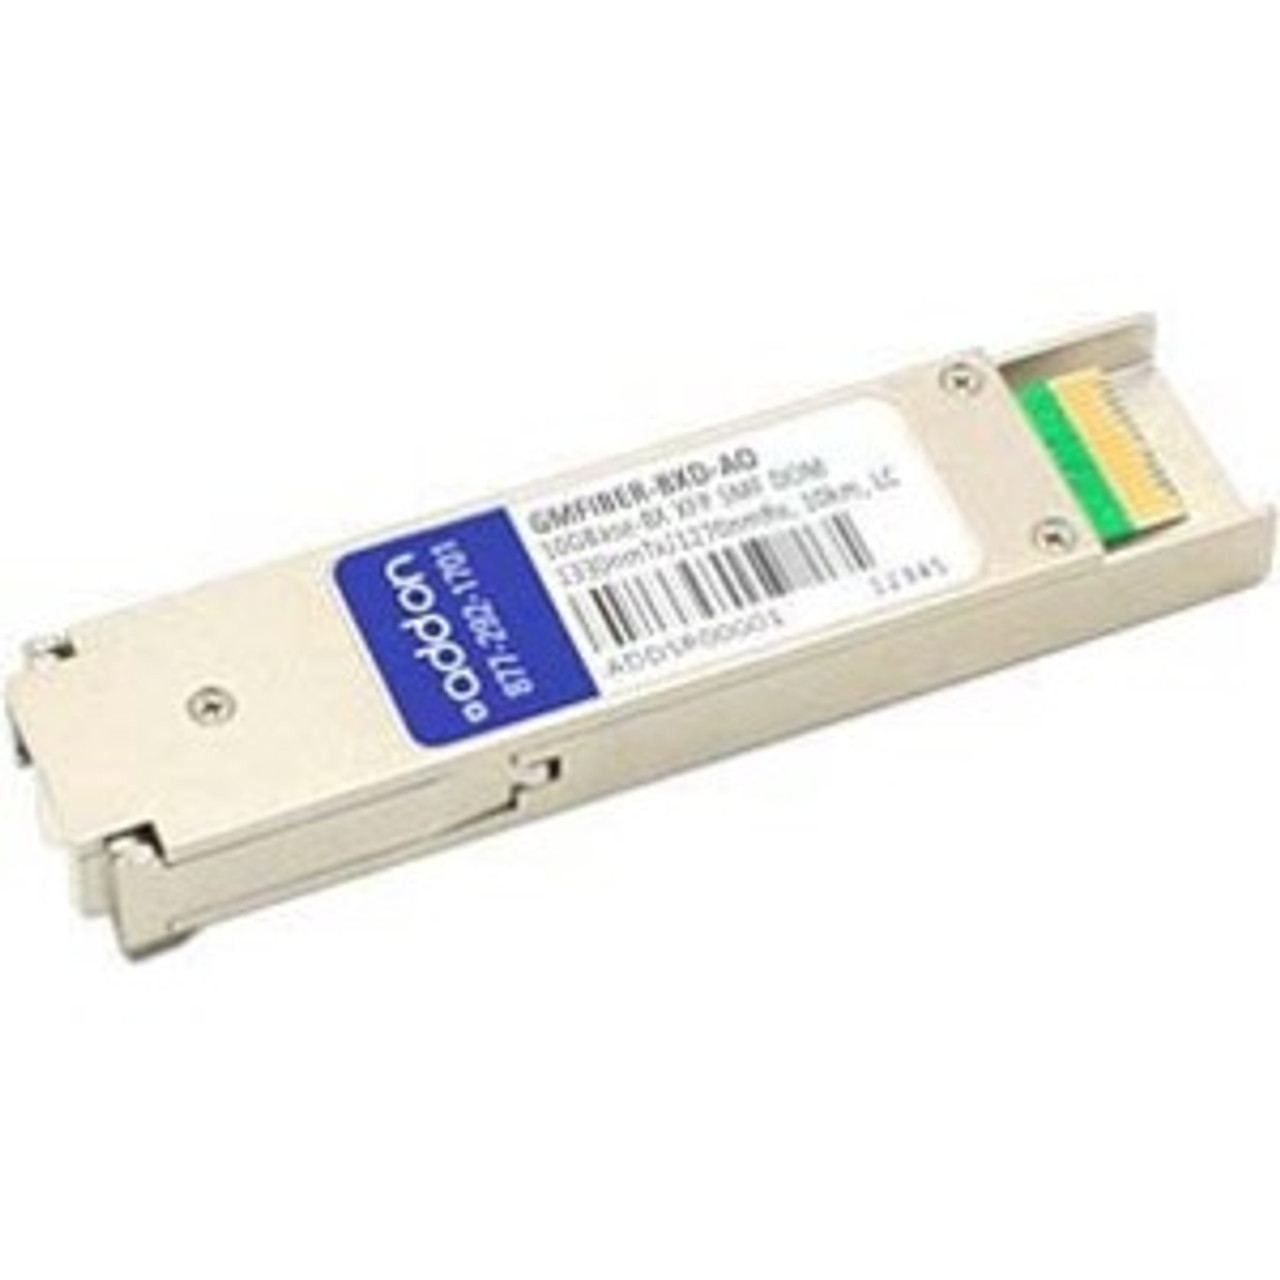 GMFIBER-BXD-AO AddOn 10Gbps 10GBase-BX Single-mode Fiber 10km 1330nmTX/1270nmRX LC Connector XFP Transceiver Module for Sixnet